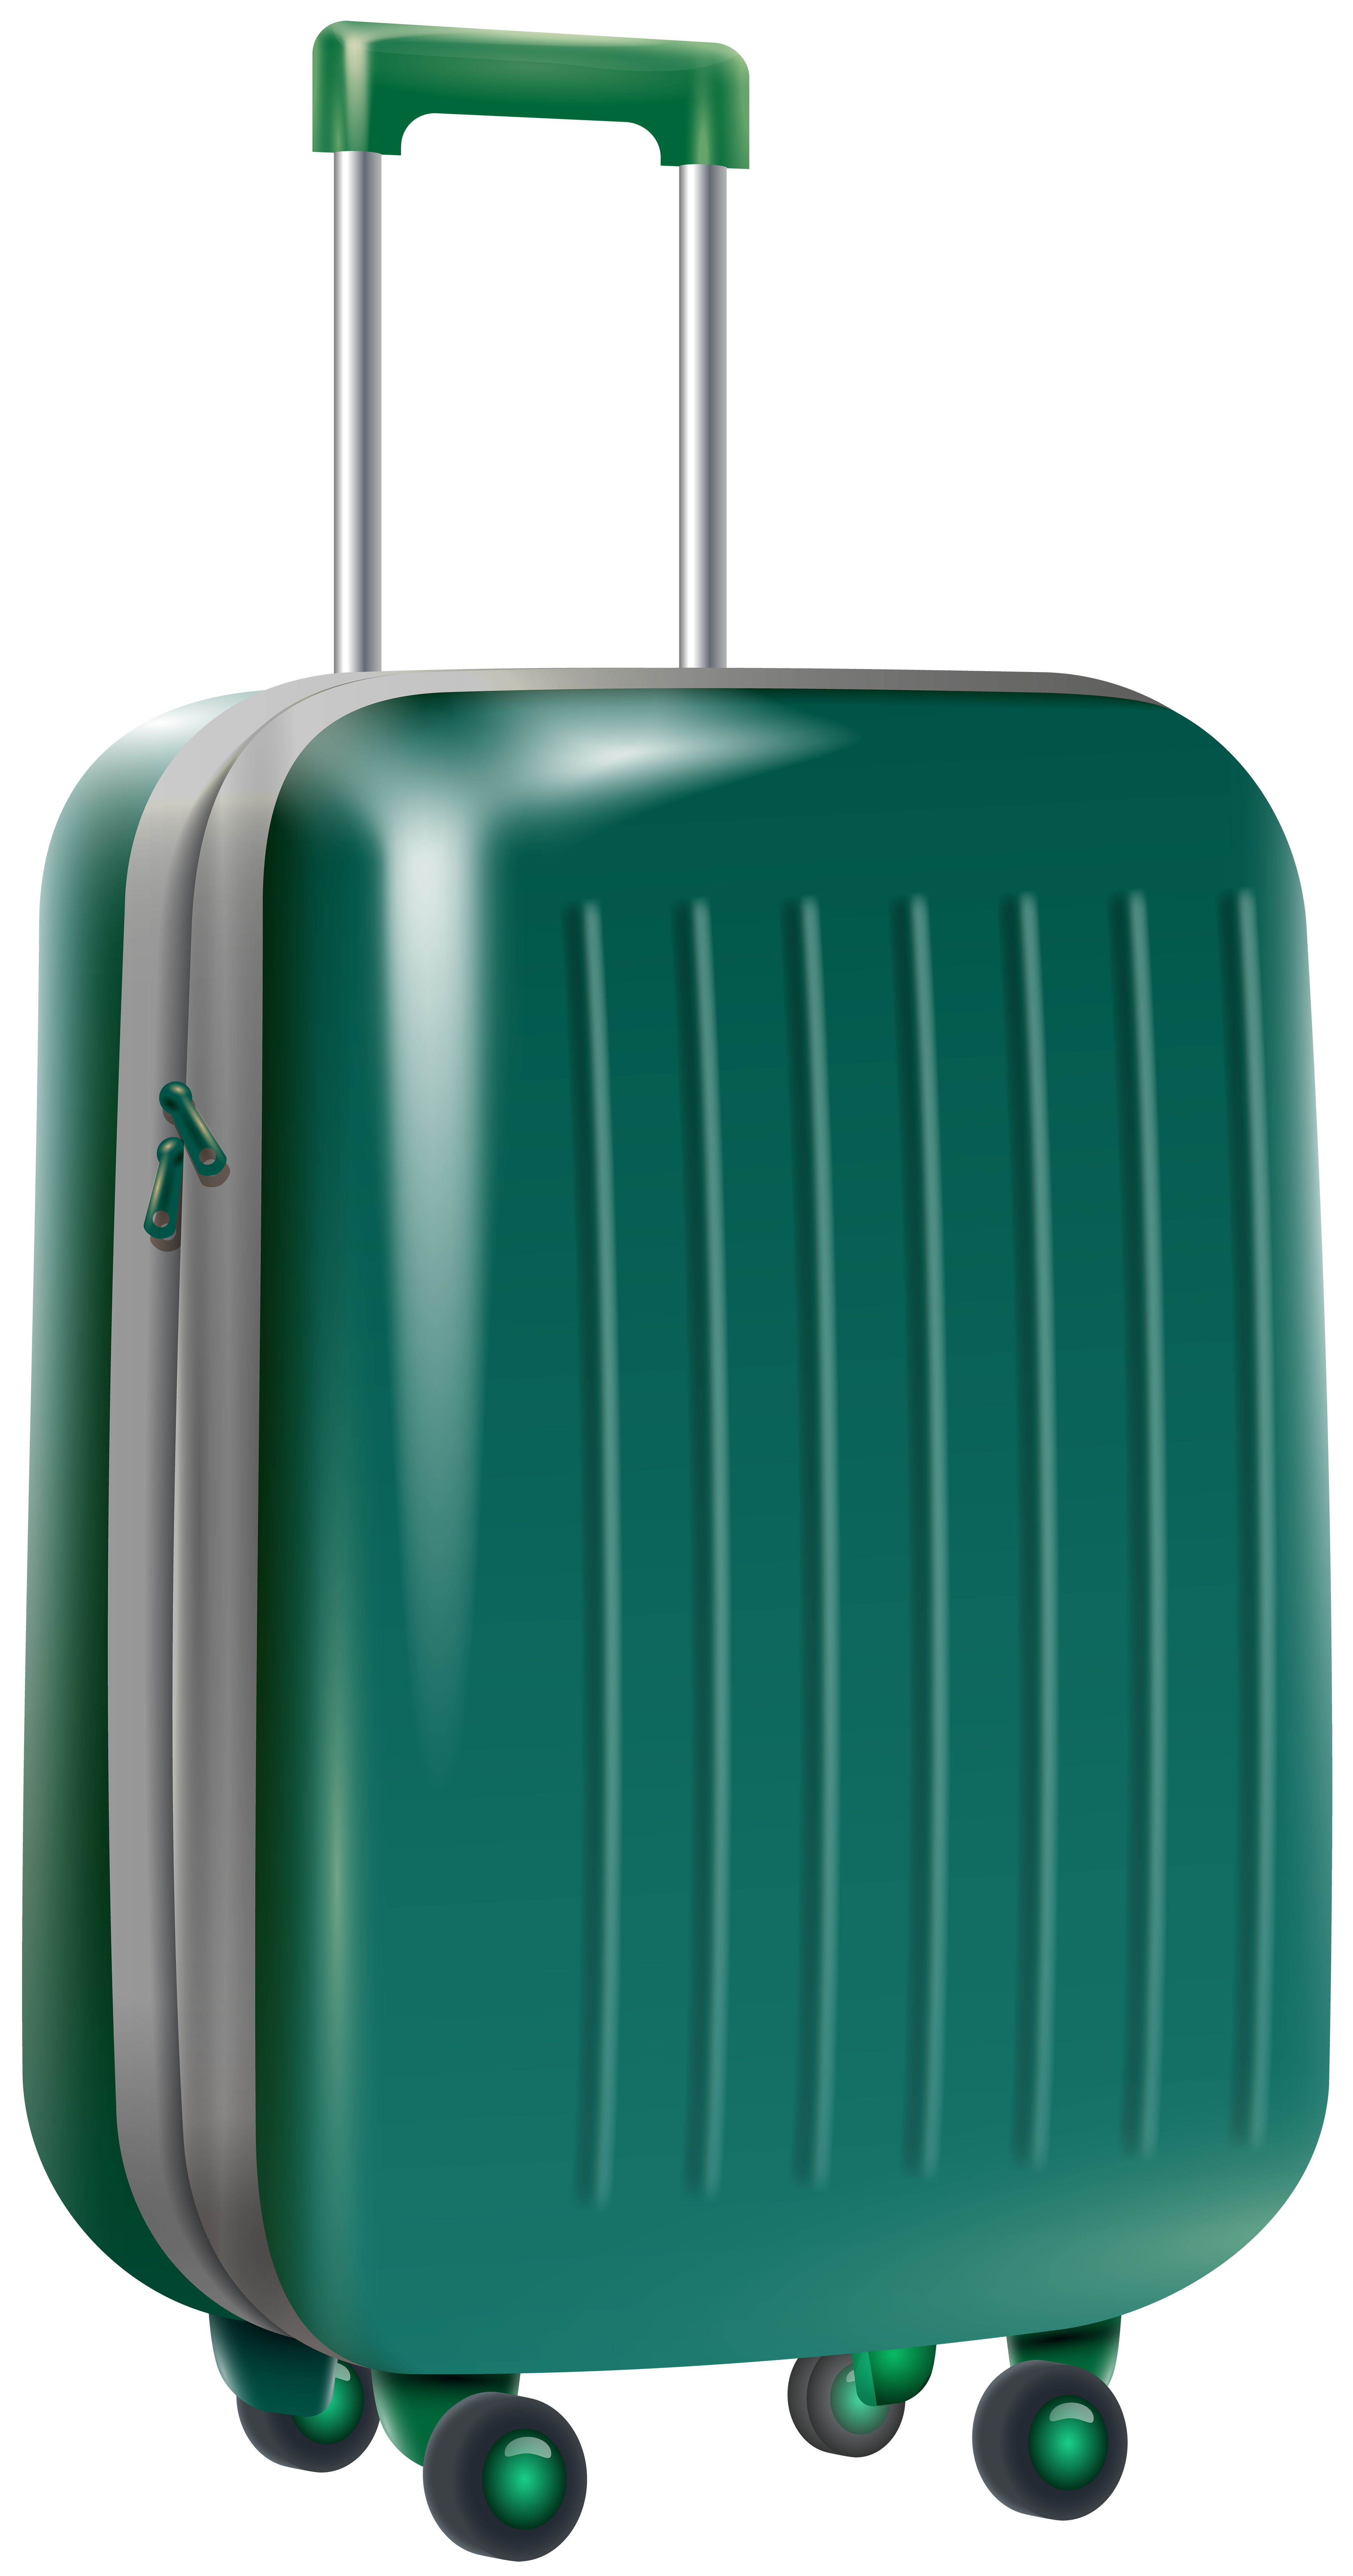 Green Suitcase Baggage Travel PNG High Definition Photo Image pngteam.com